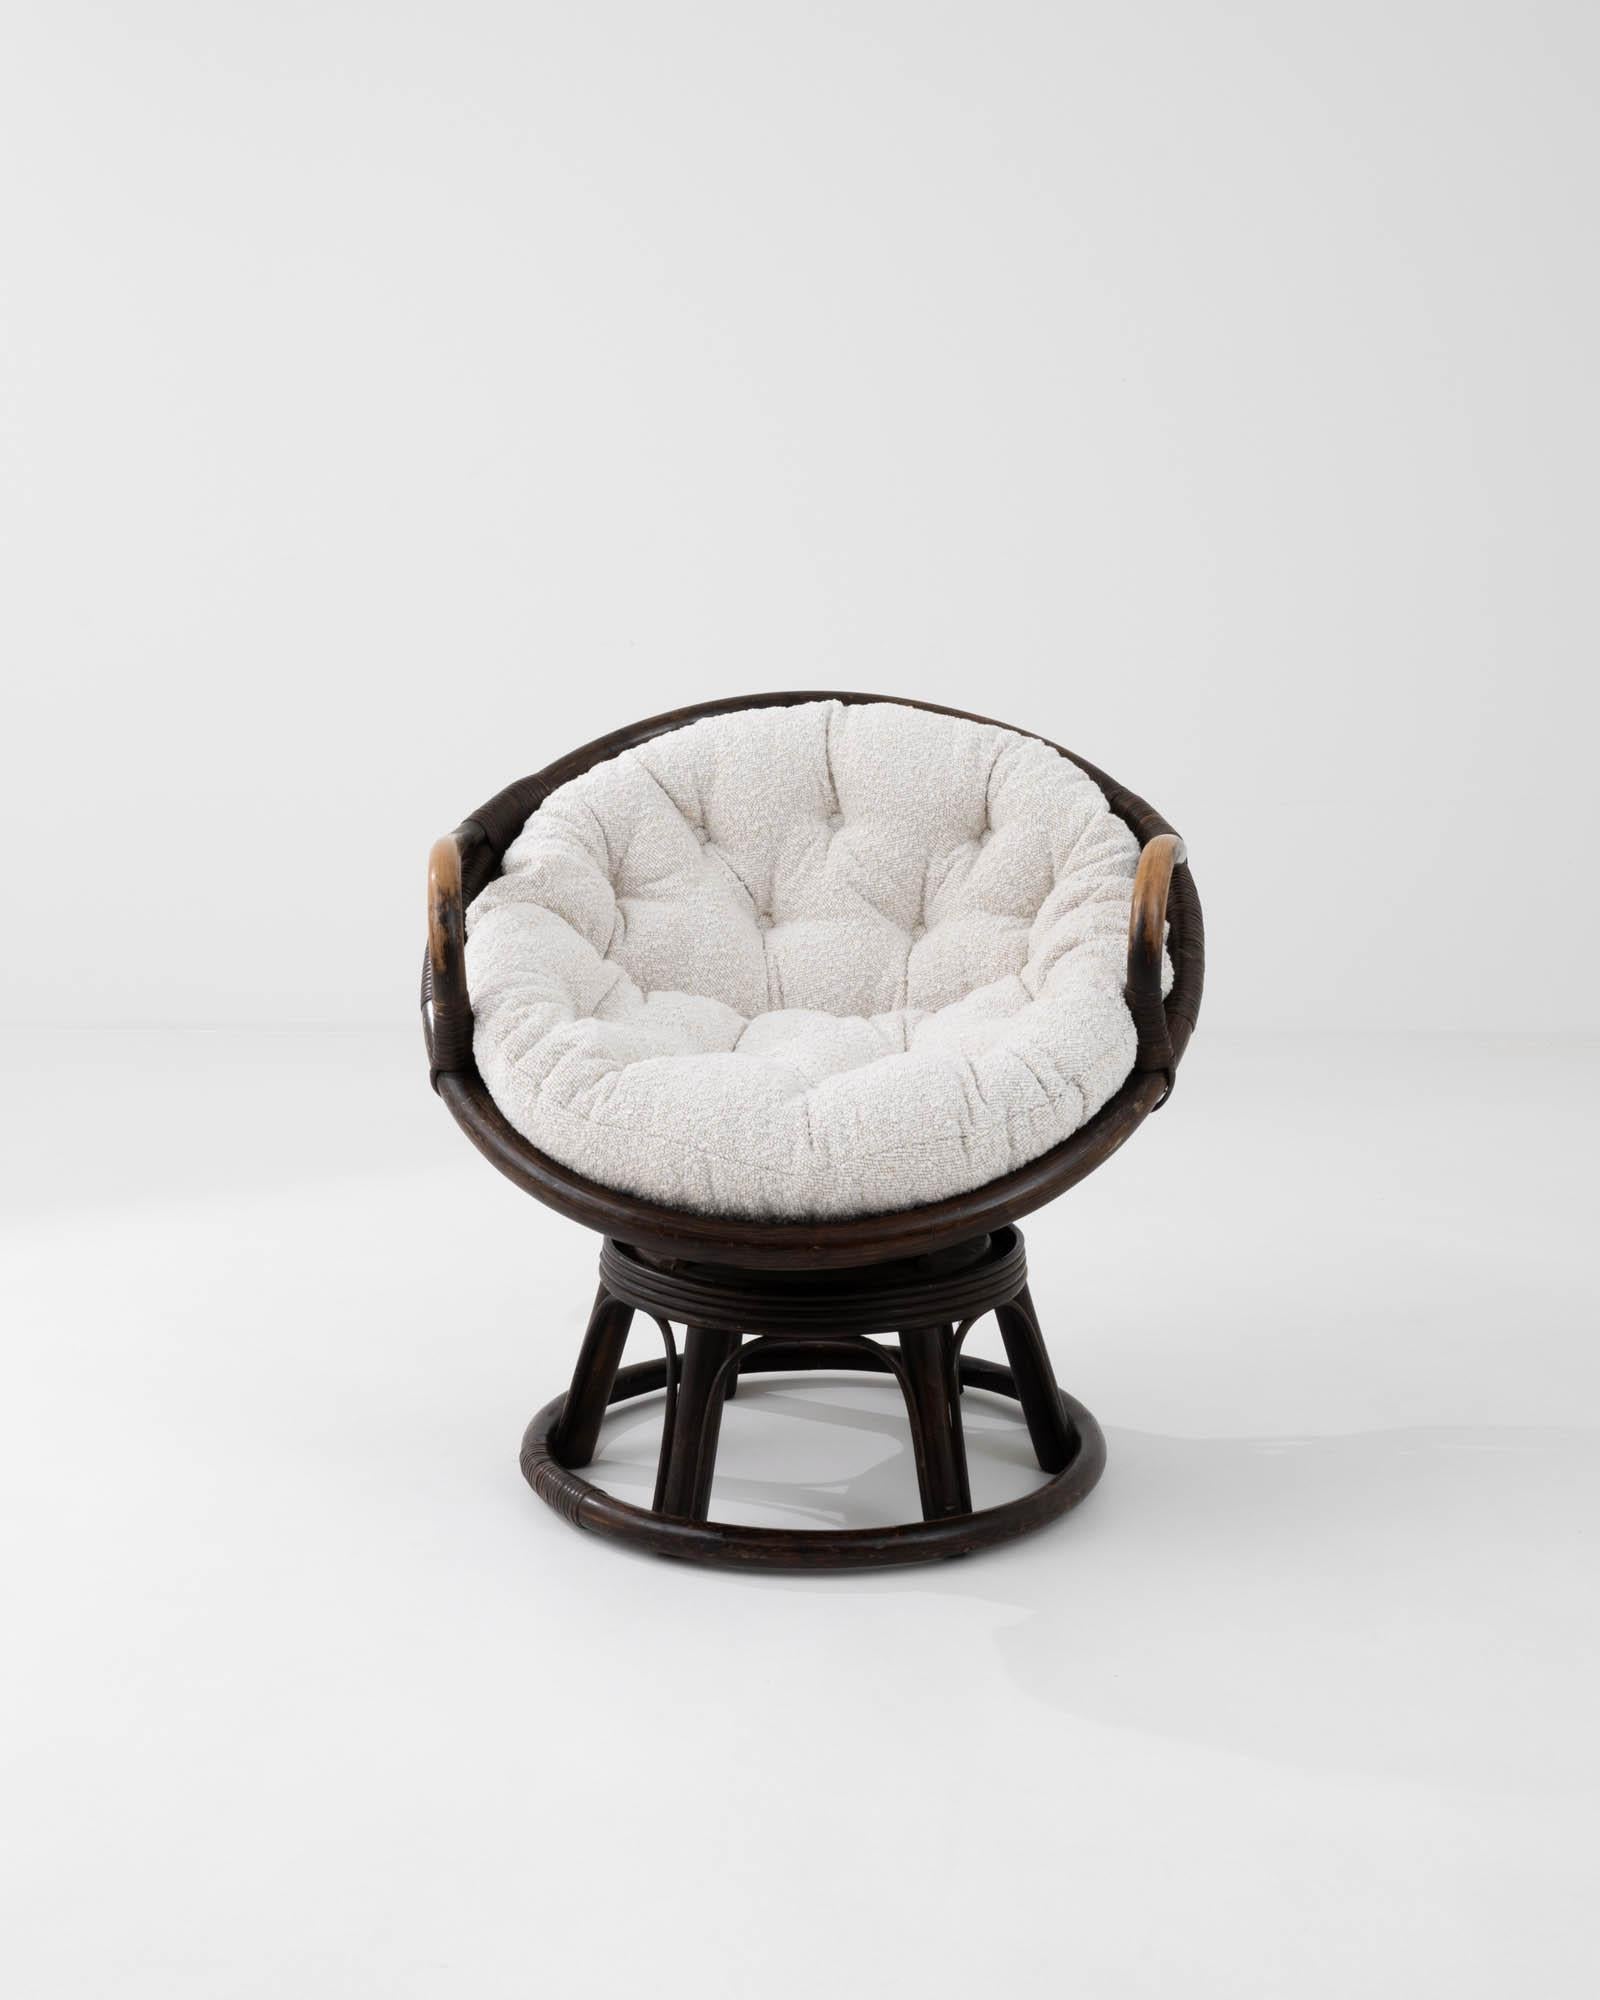 Made in France in the mid-20th century, this rattan frame lounge chair is topped with a soft bouclé cushion. Rotating for added comfort, this chair rests the sitter in a low recline for ultimate comfort. A rich brown finish heightens the sense of